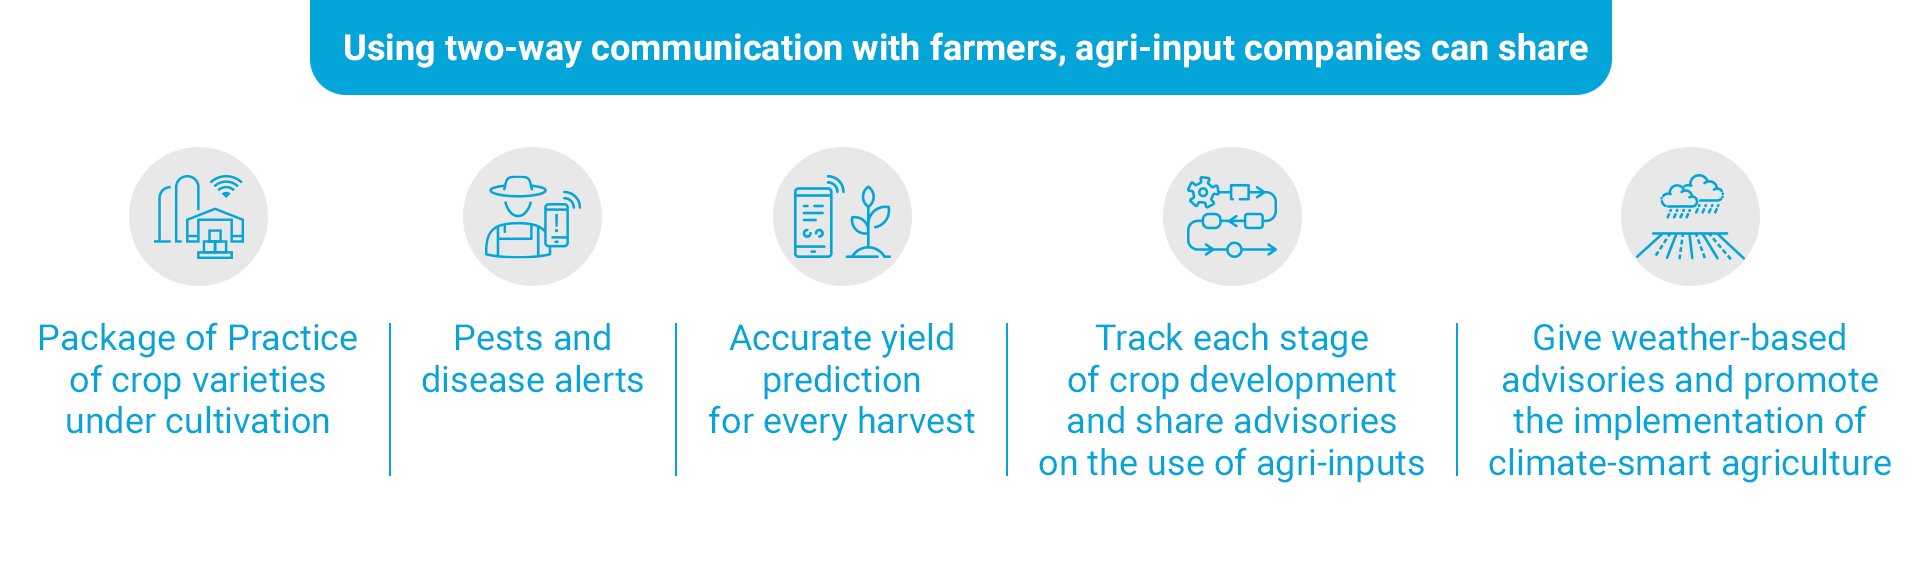 improved sales metrics with agriculture technology